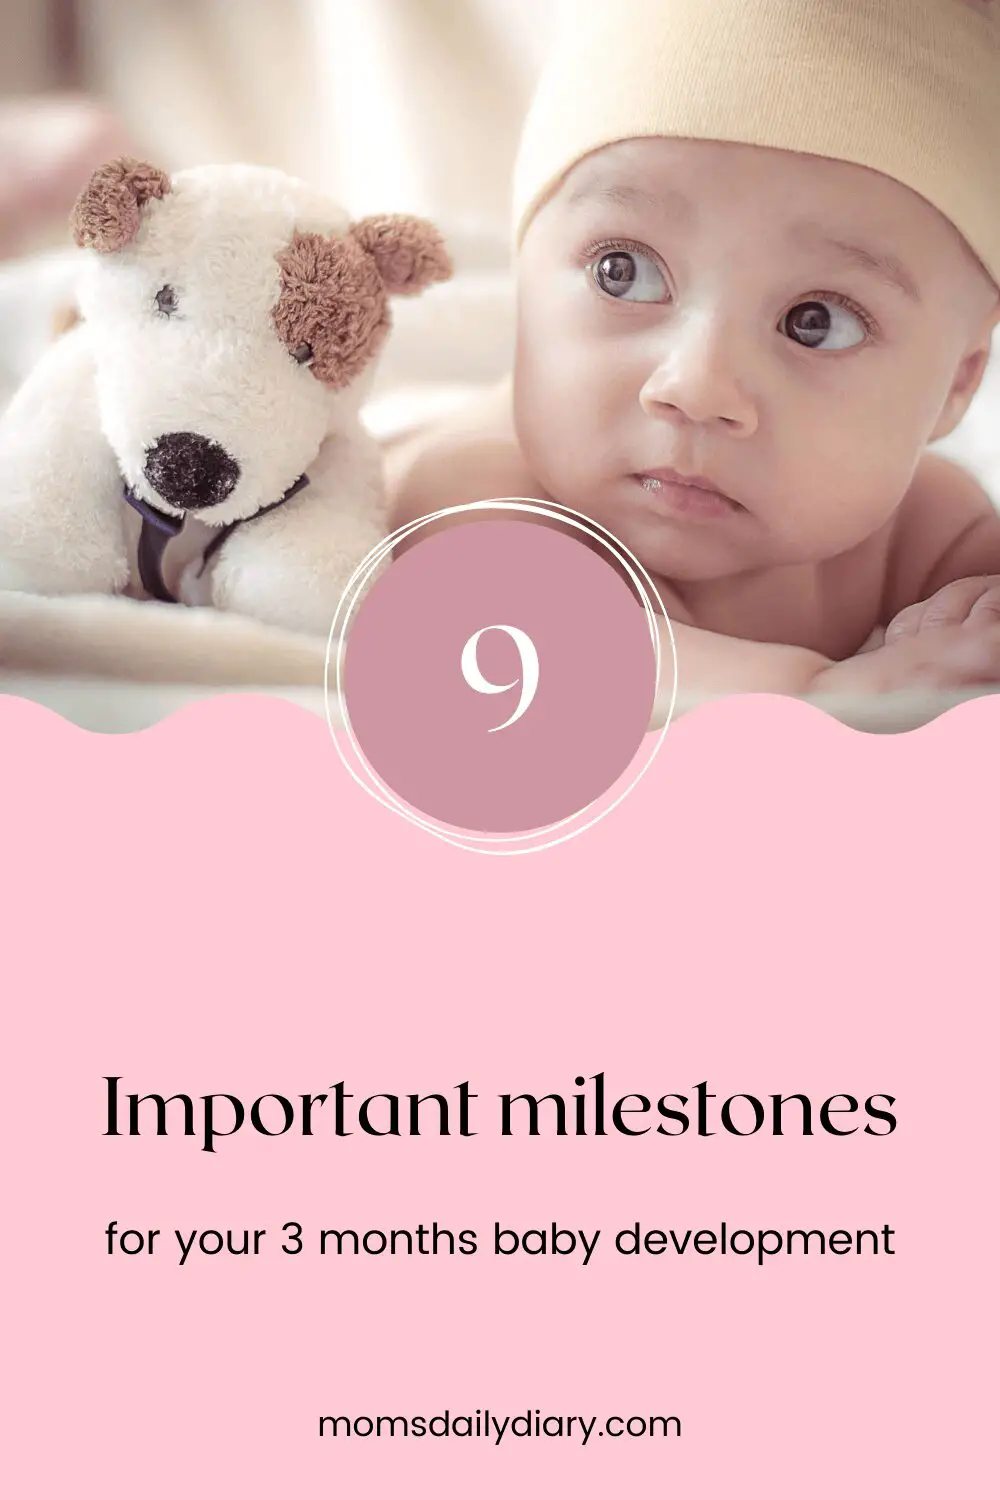 Meeting milestones is an exciting experience for every parent. Here are 9 important milestones for your 3 months old baby.